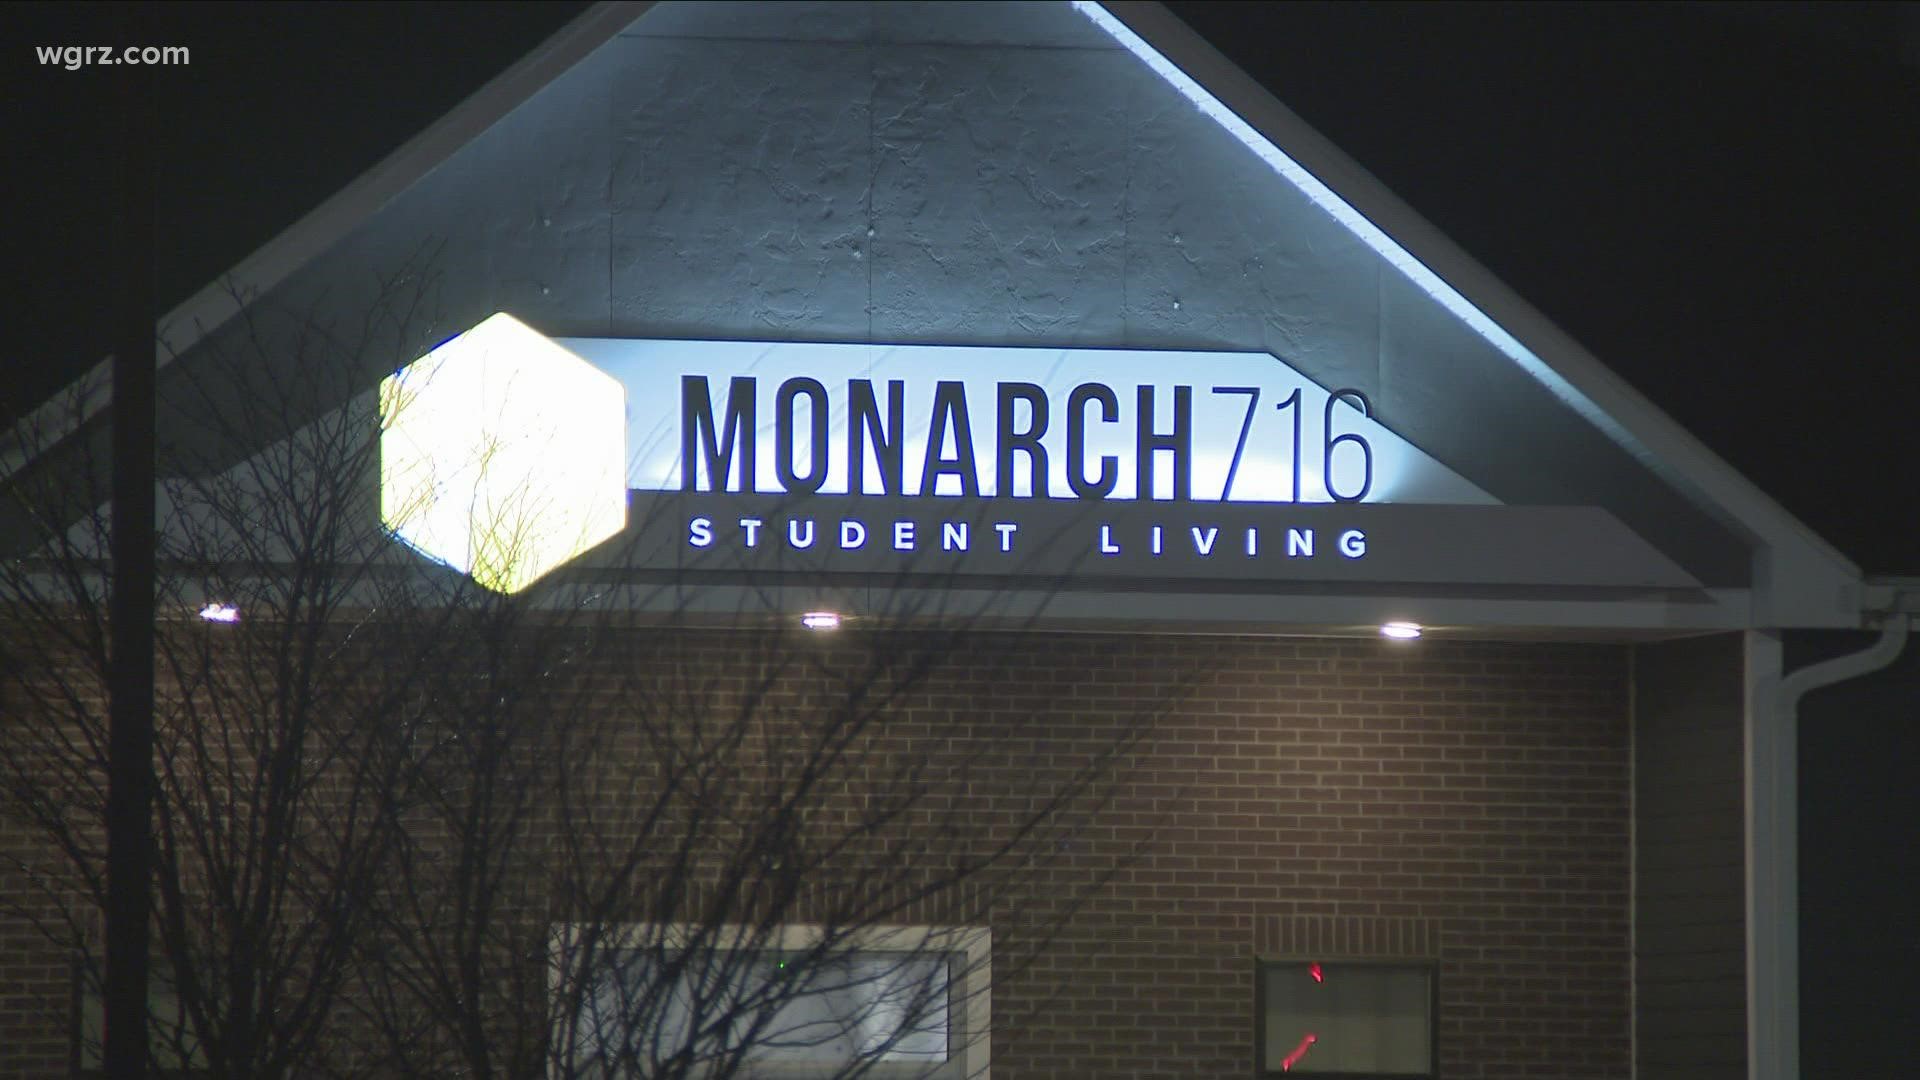 Monarch 716 must pay restitution to Buffalo State students whom the state says the company tricked into signing leases.